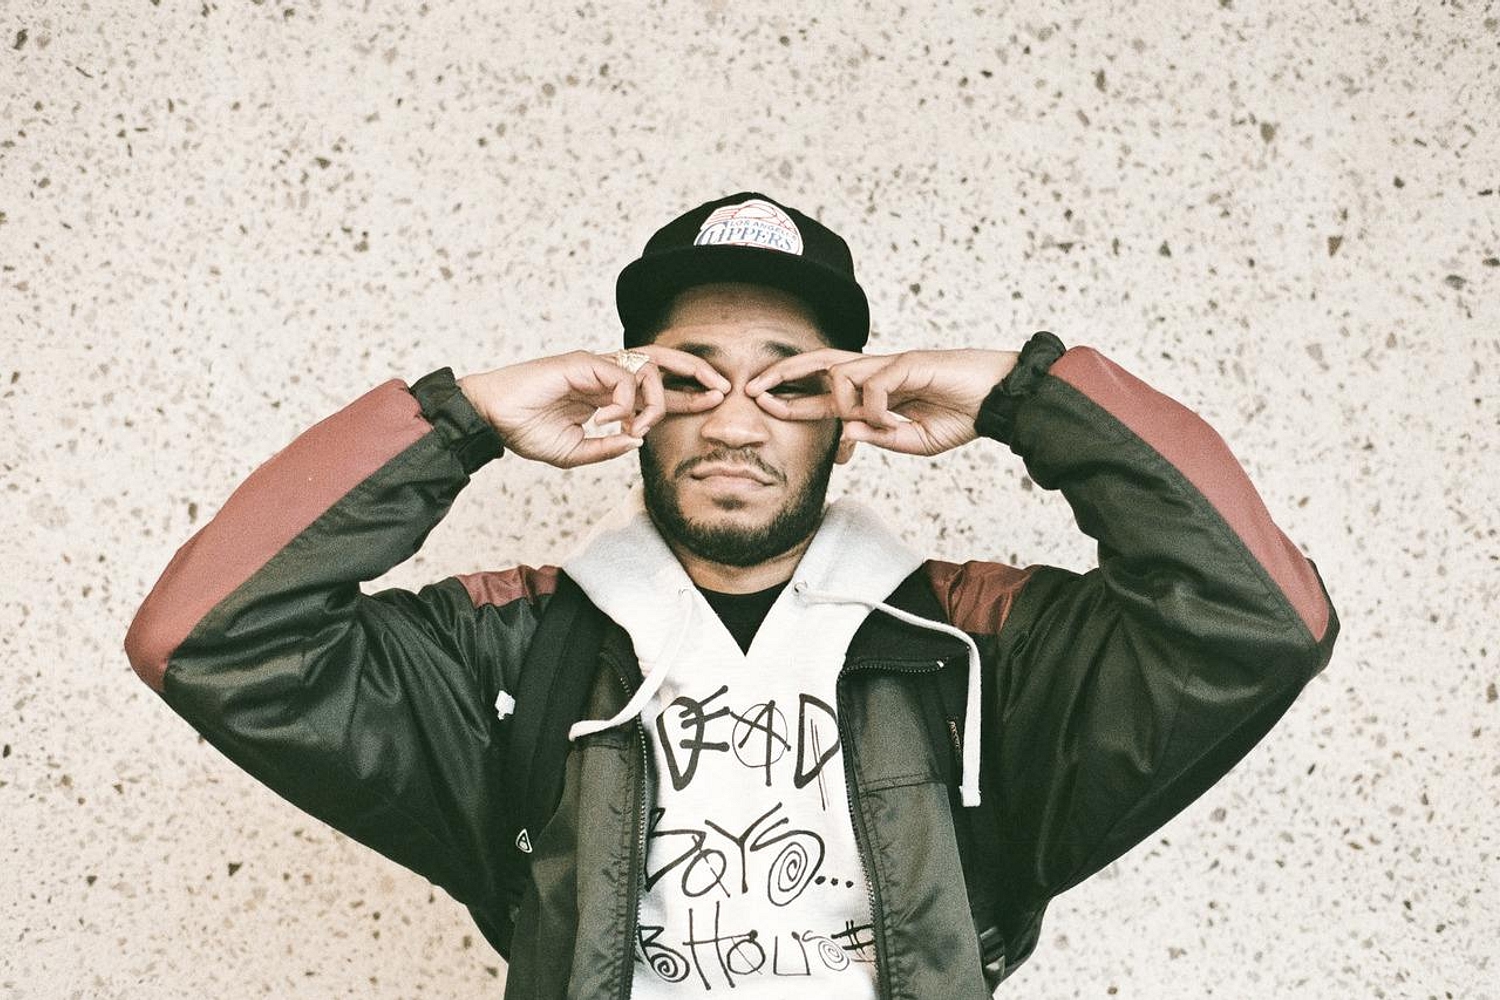 Kaytranada’s working on a collaboration with Chance the Rapper